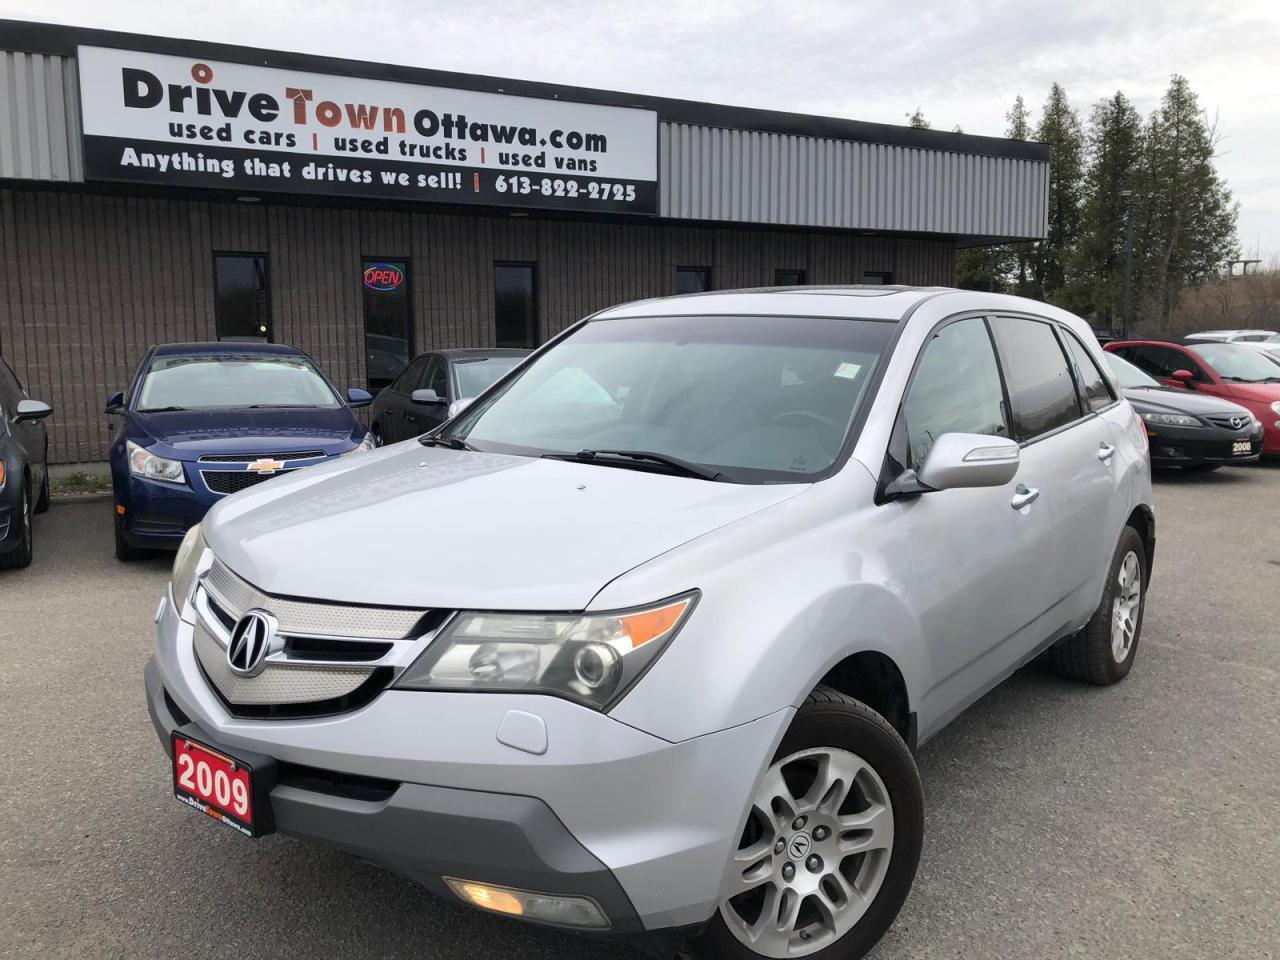 2009 Acura MDX sold as is 4WD 4dr